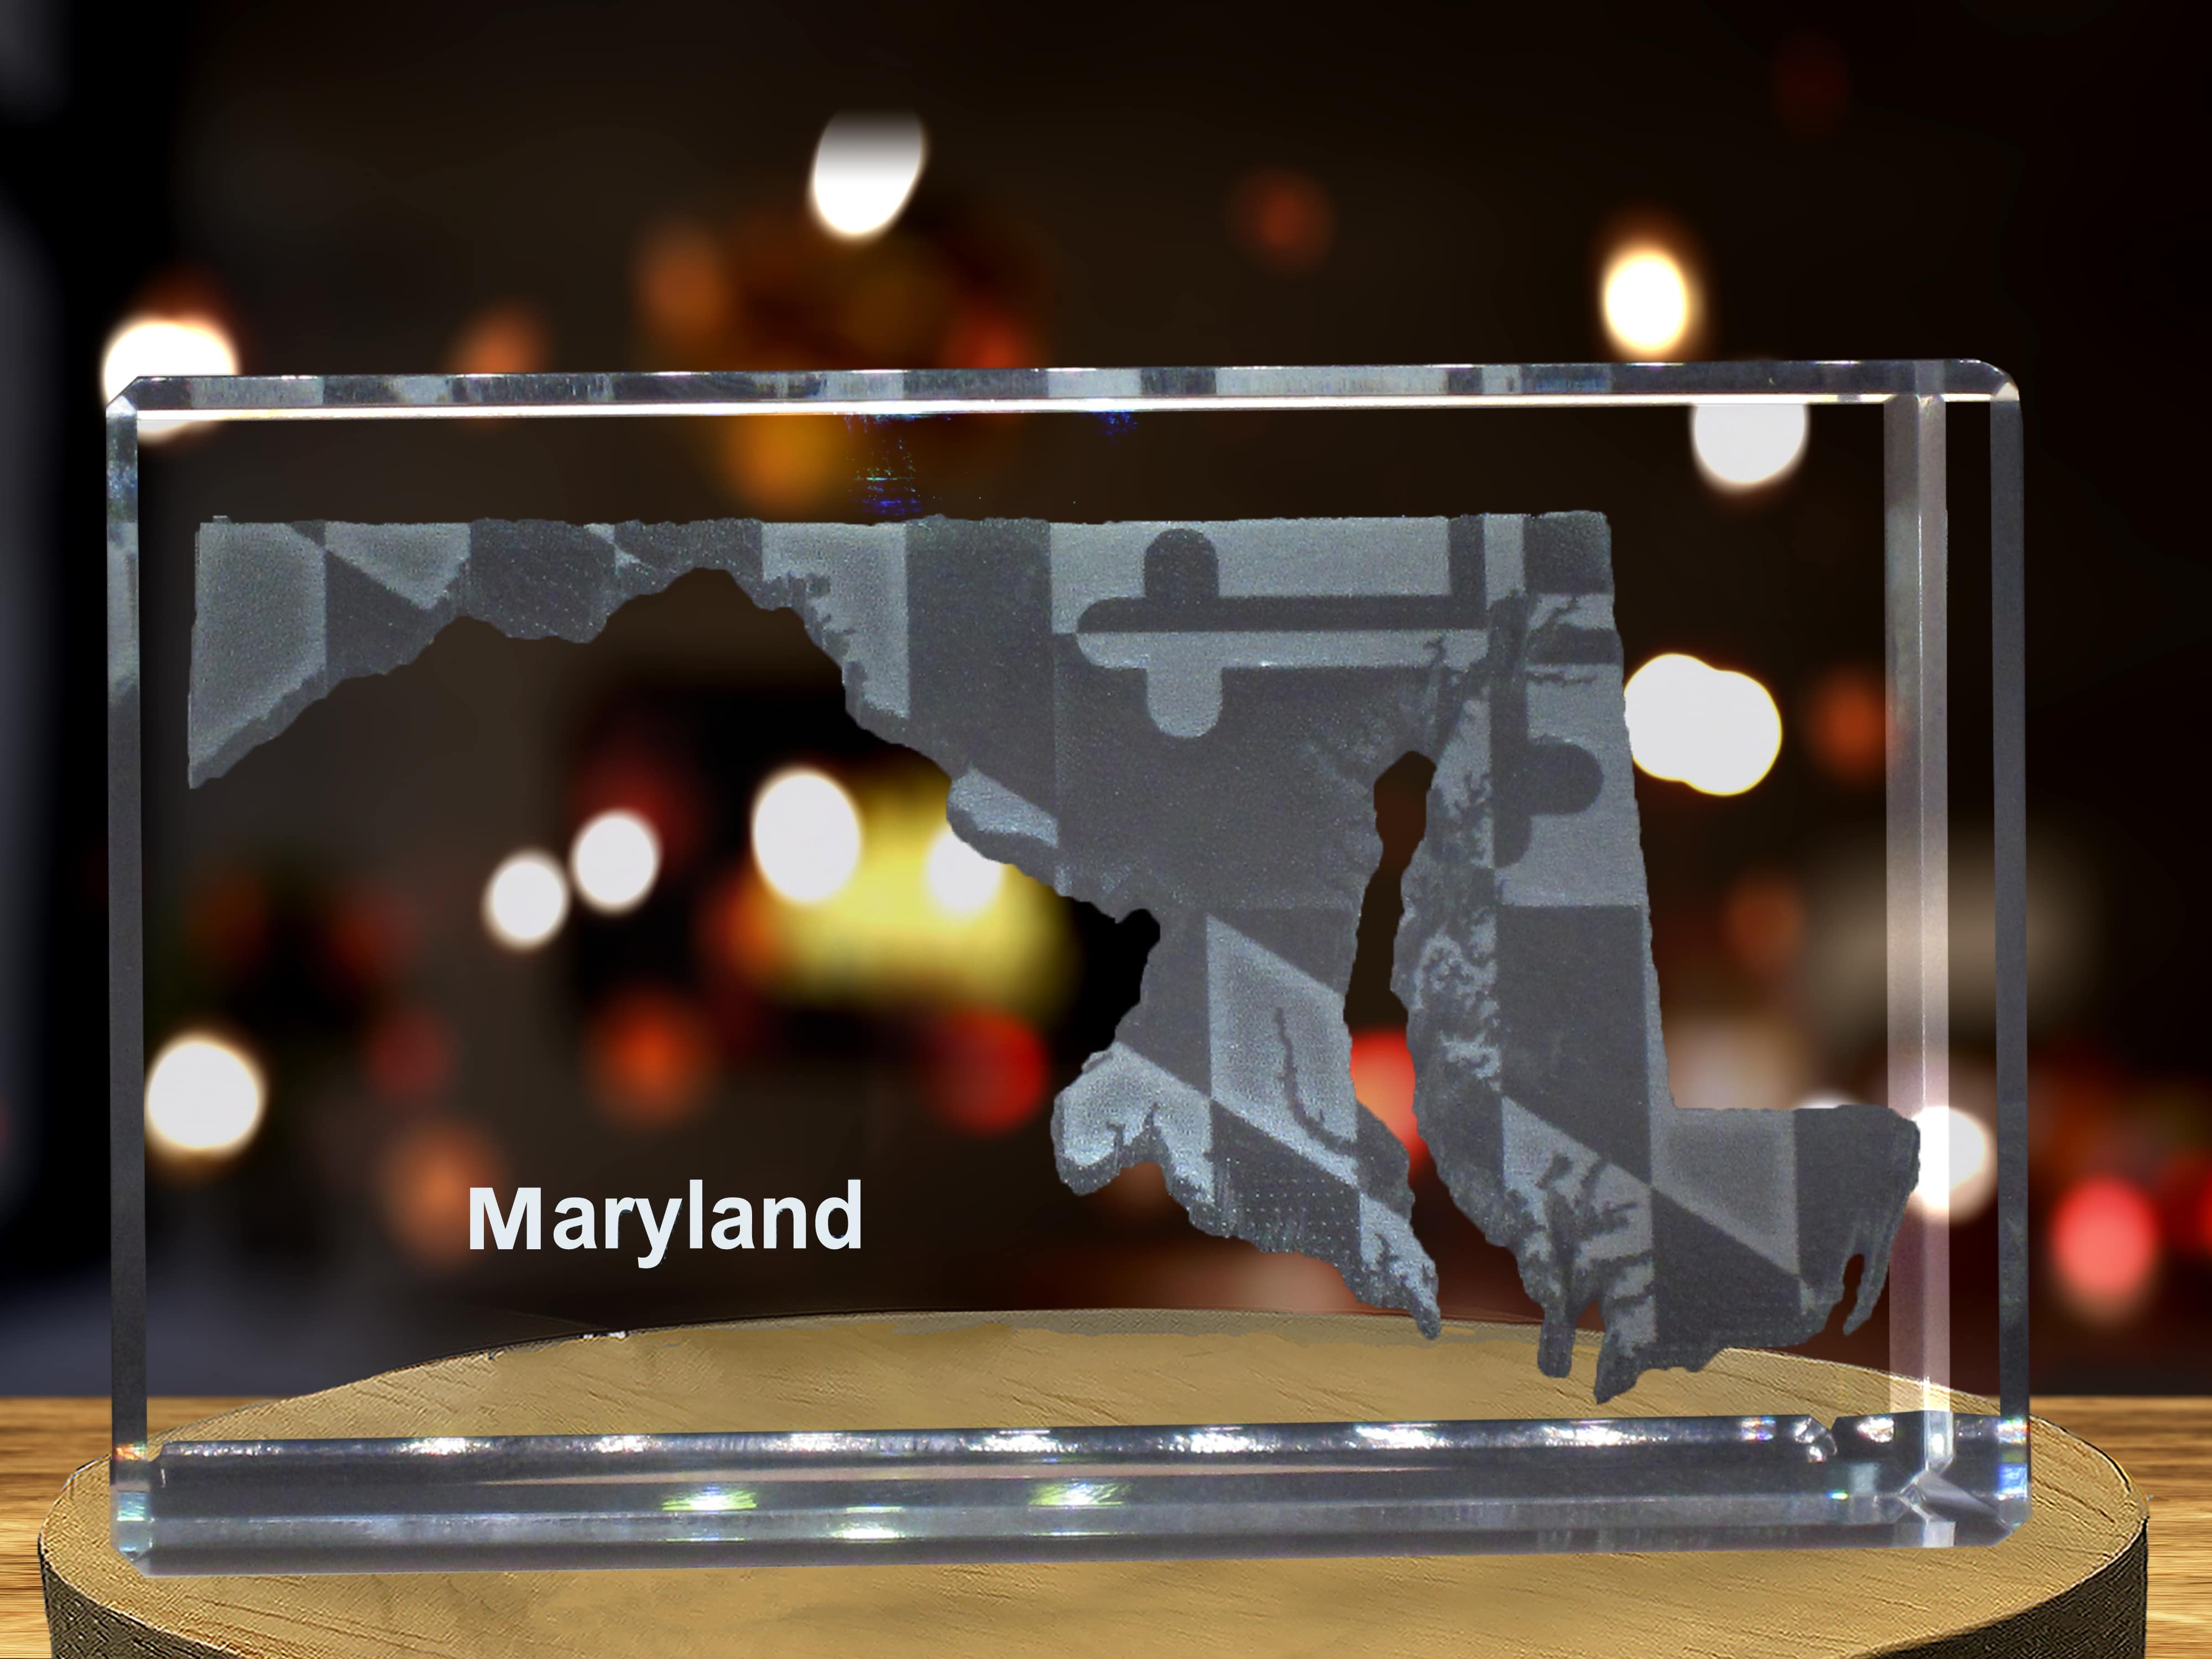 Maryland 3D Engraved Crystal 3D Engraved Crystal Keepsake/Gift/Decor/Collectible/Souvenir A&B Crystal Collection